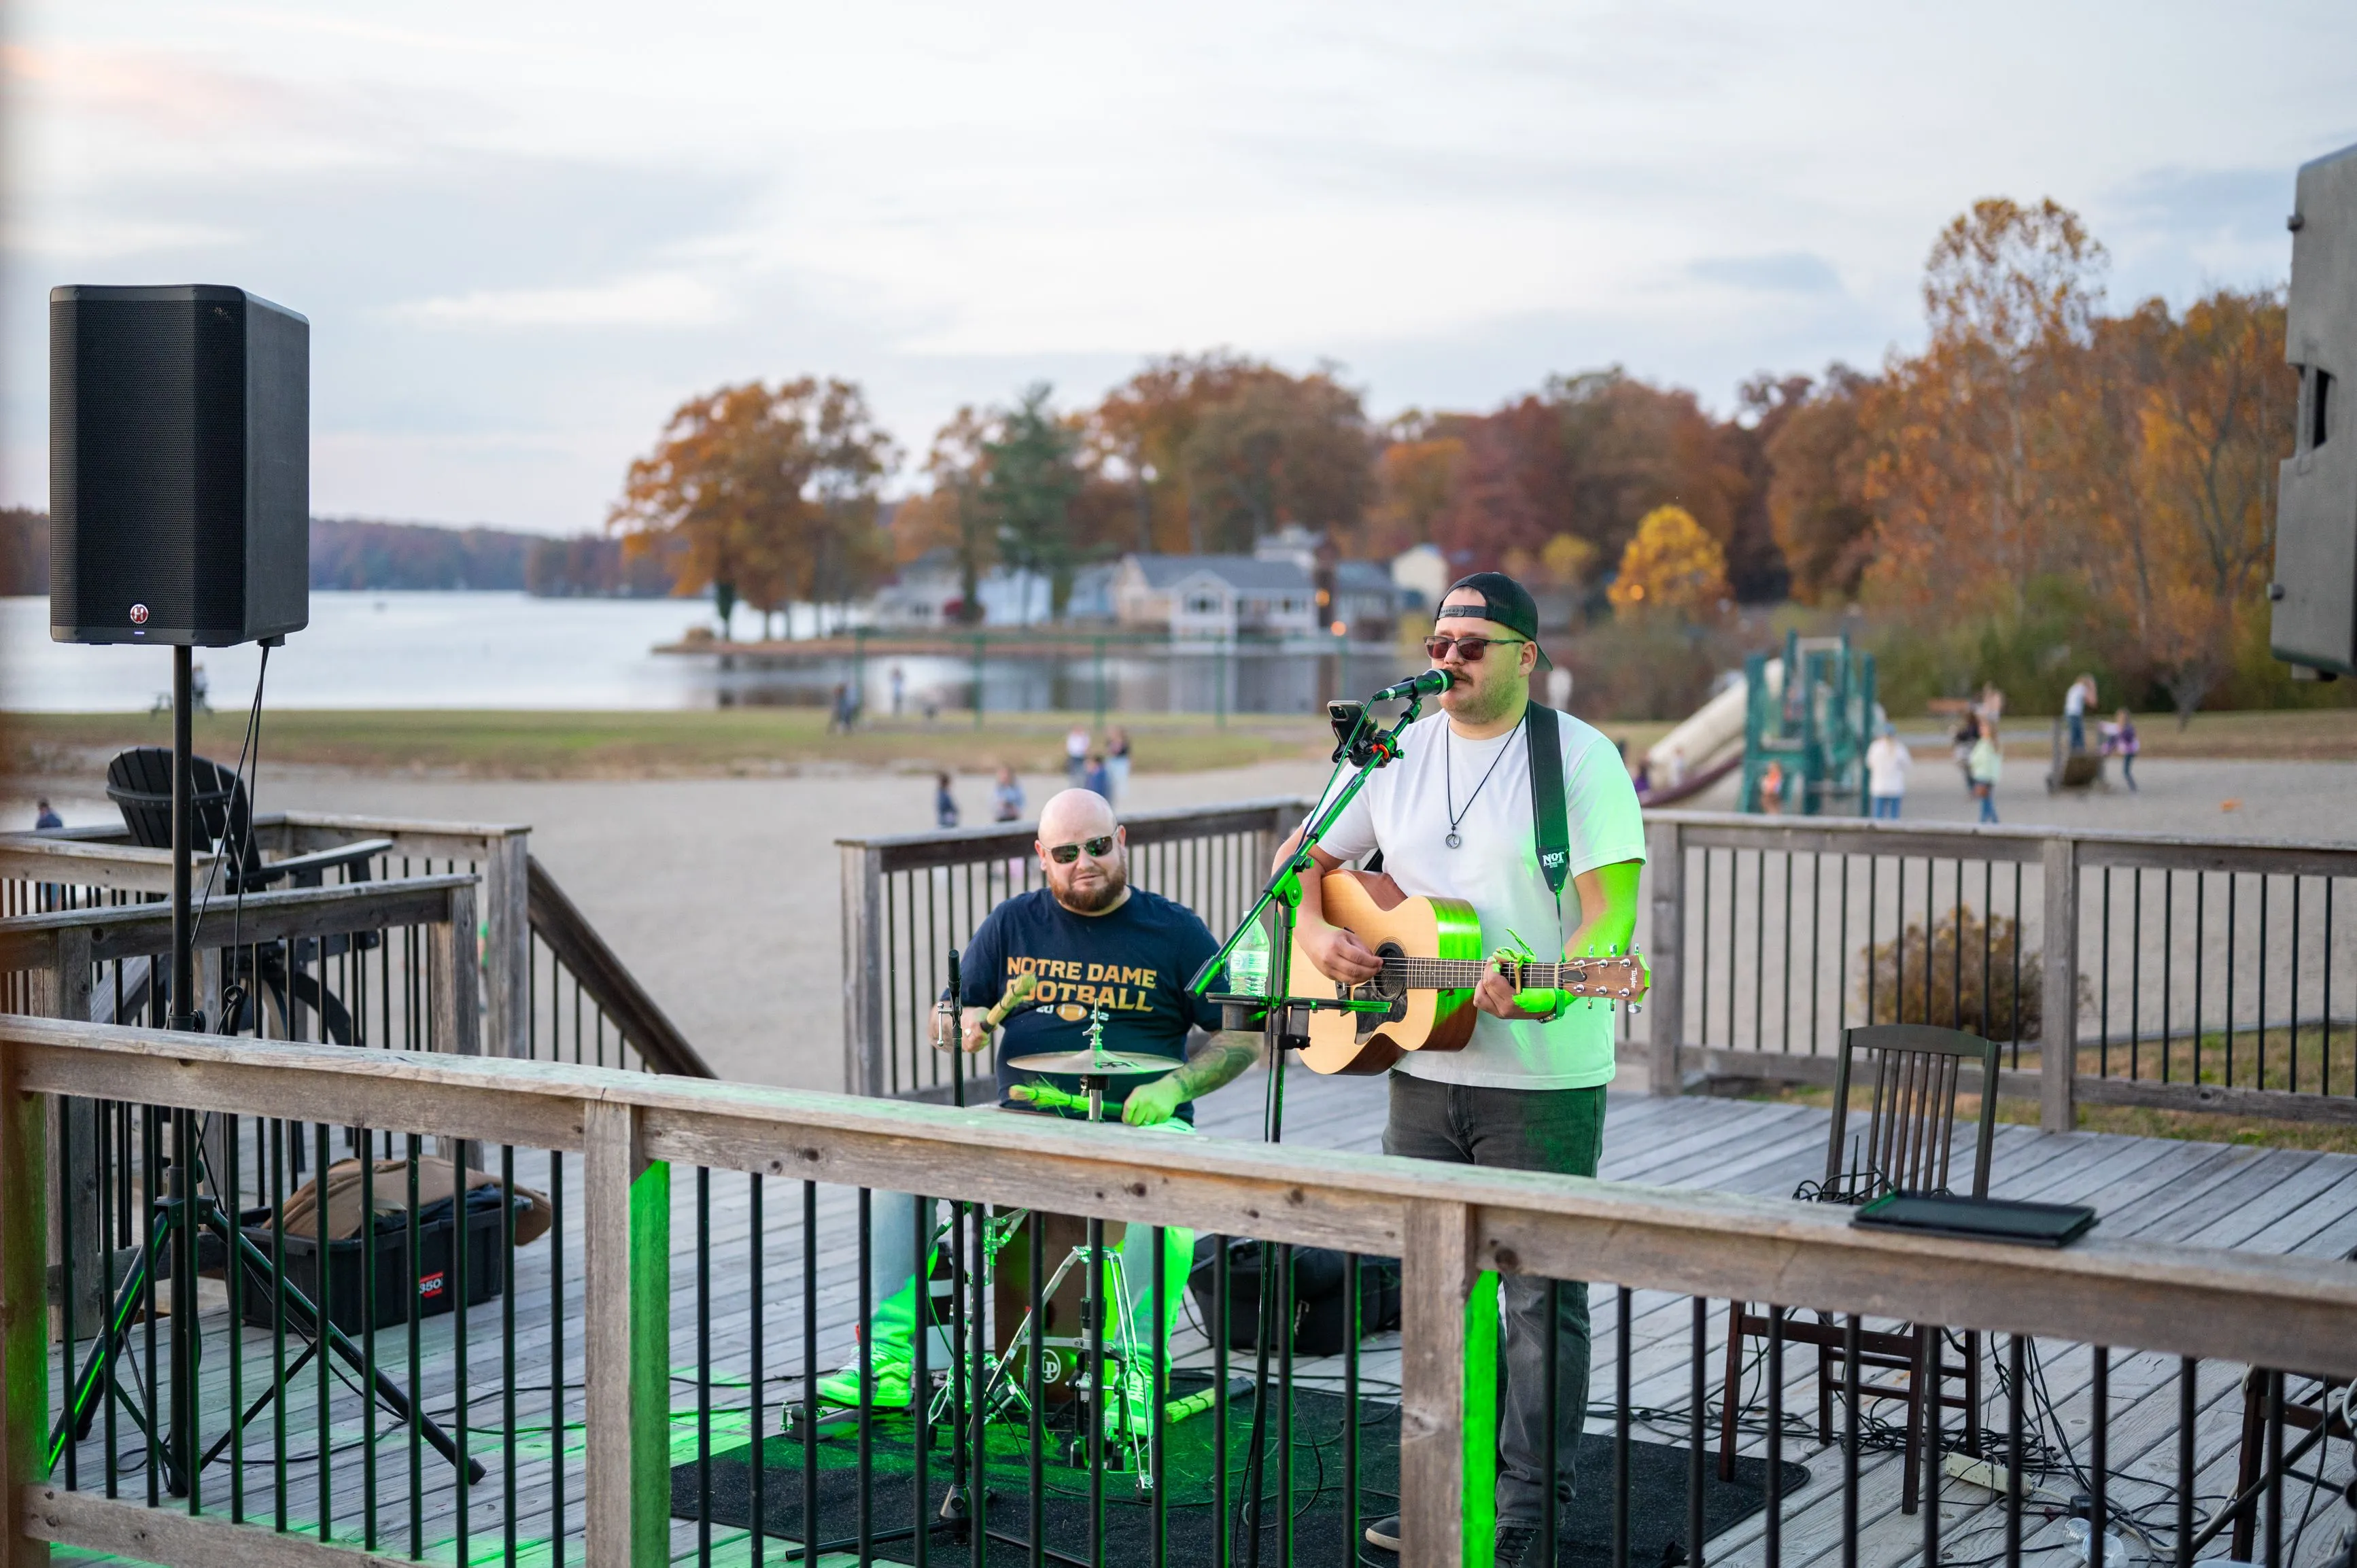 Two musicians performing outdoors on a deck overlooking a lake with autumn trees in the background.